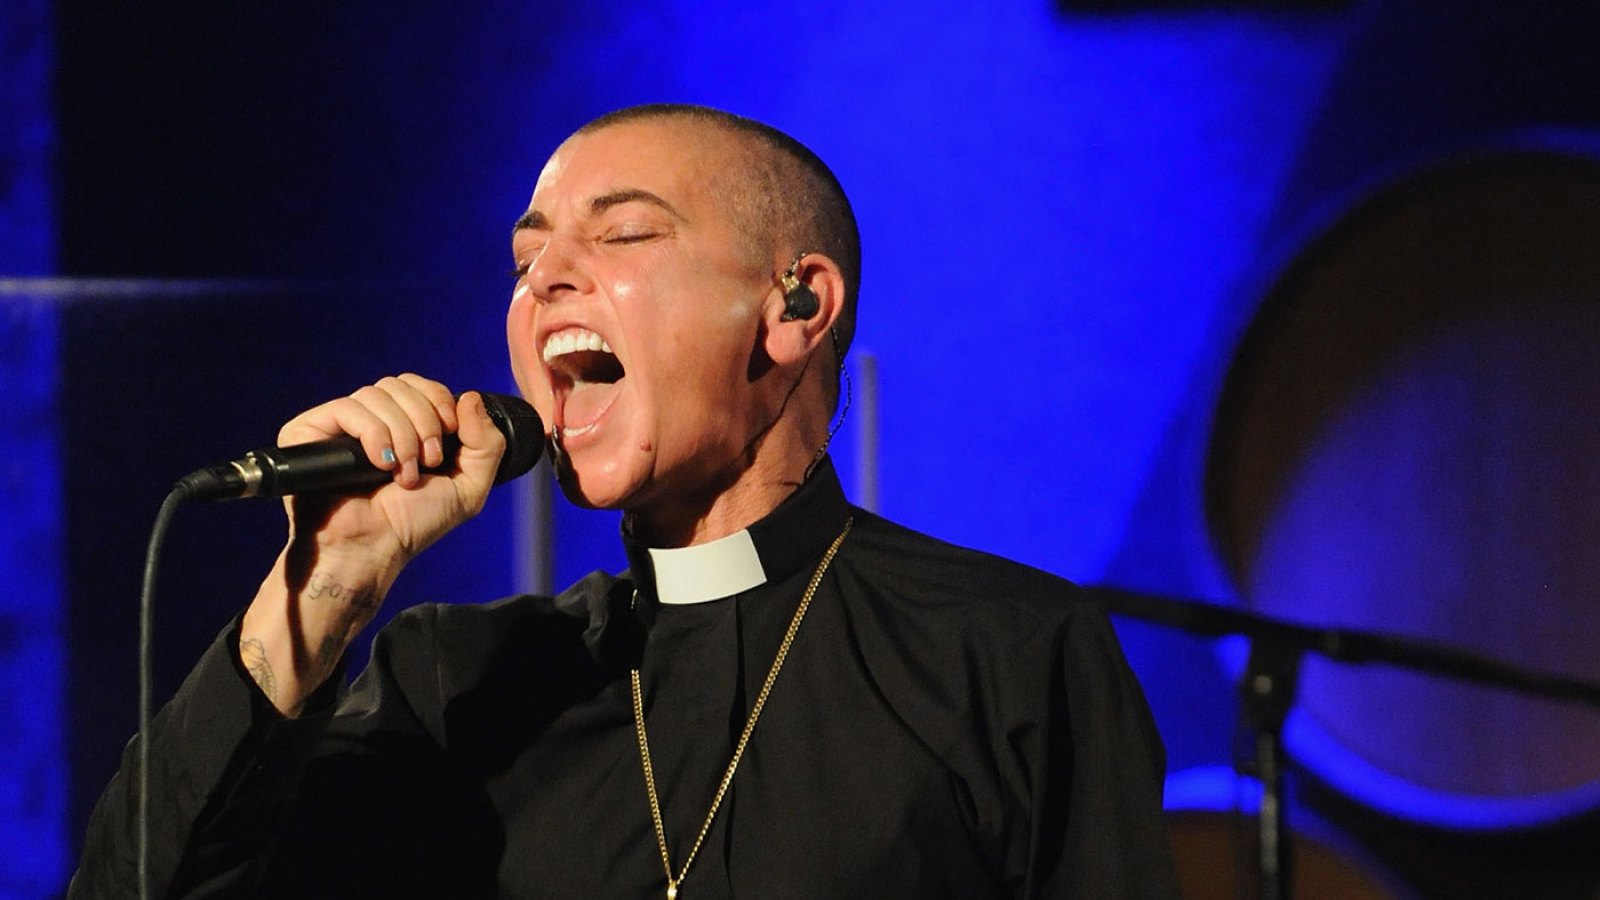 Sinead O'Connor has silenced reports of her suicide attempt